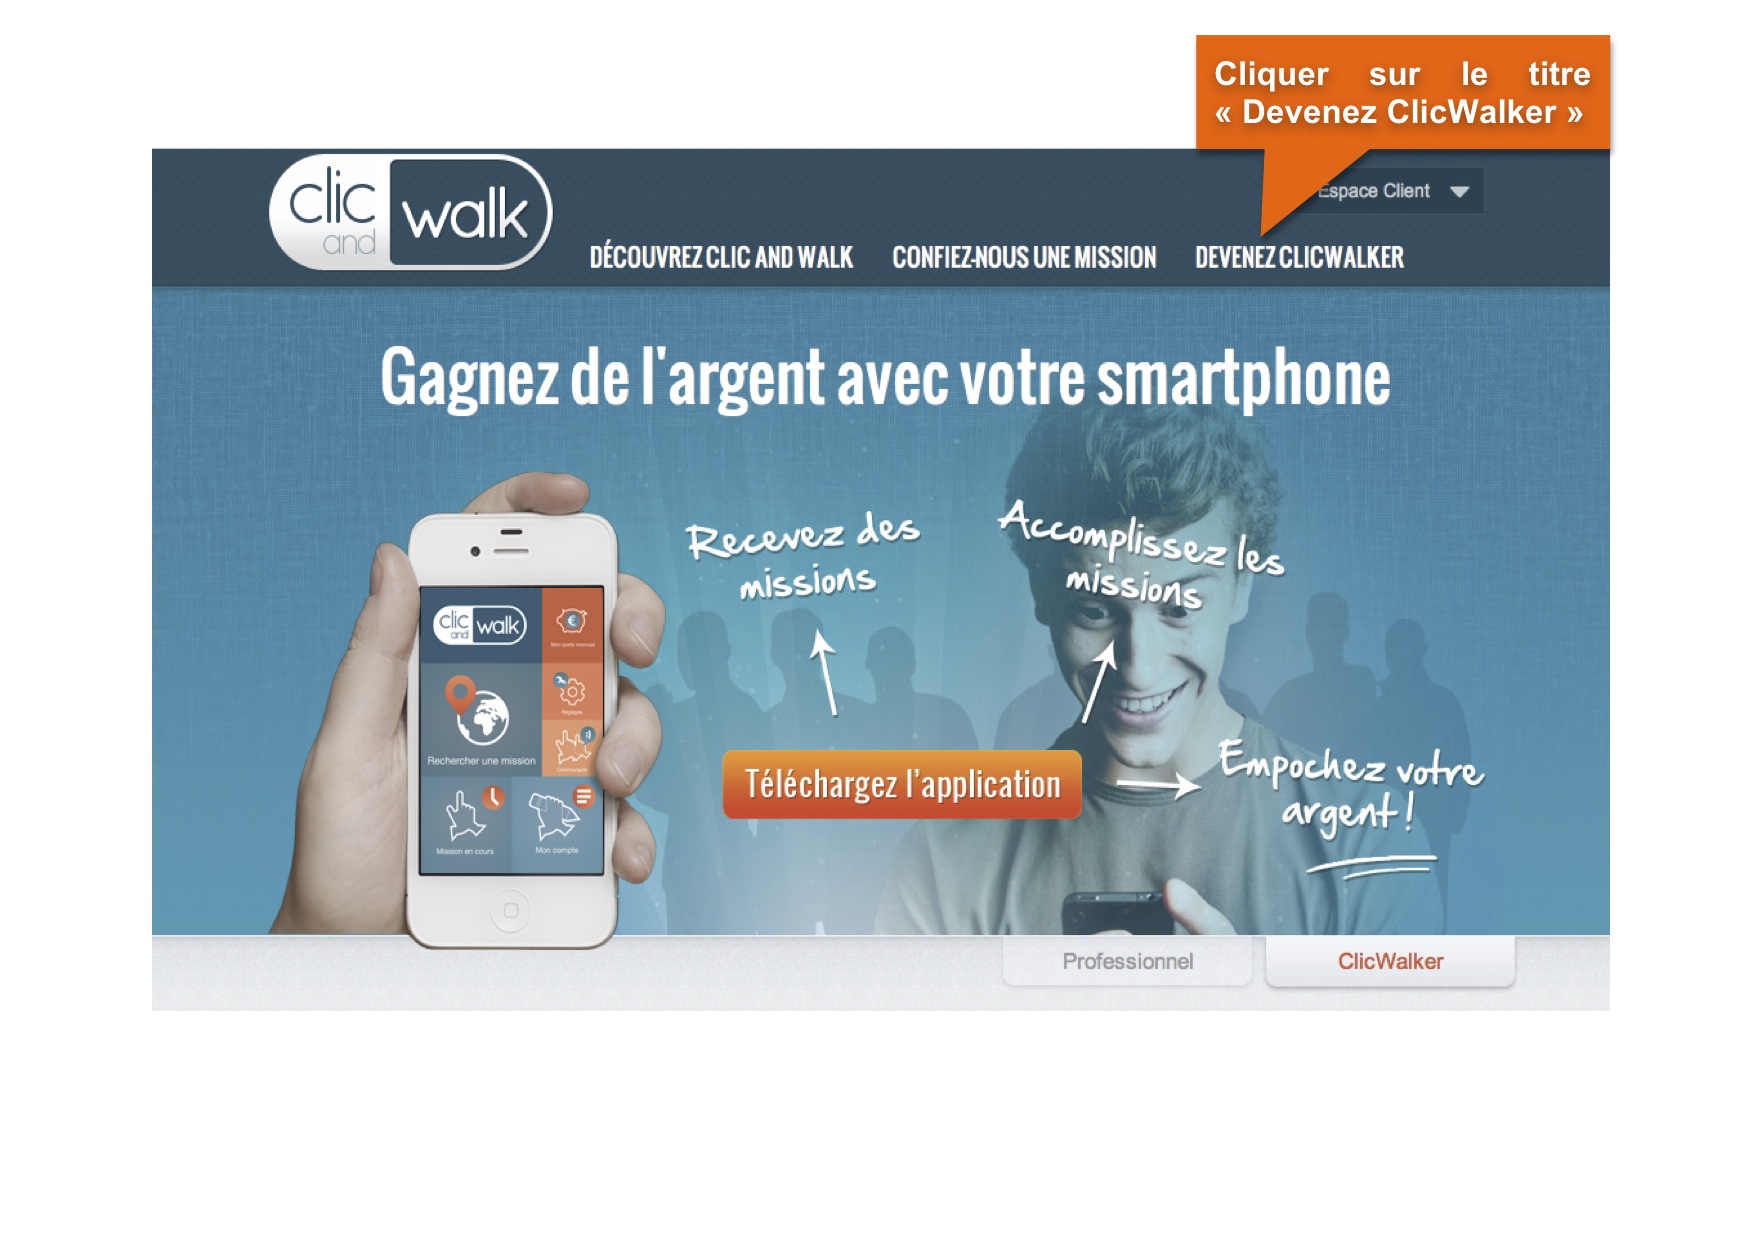 « Clic and walk » reinvents the customer satisfaction survey